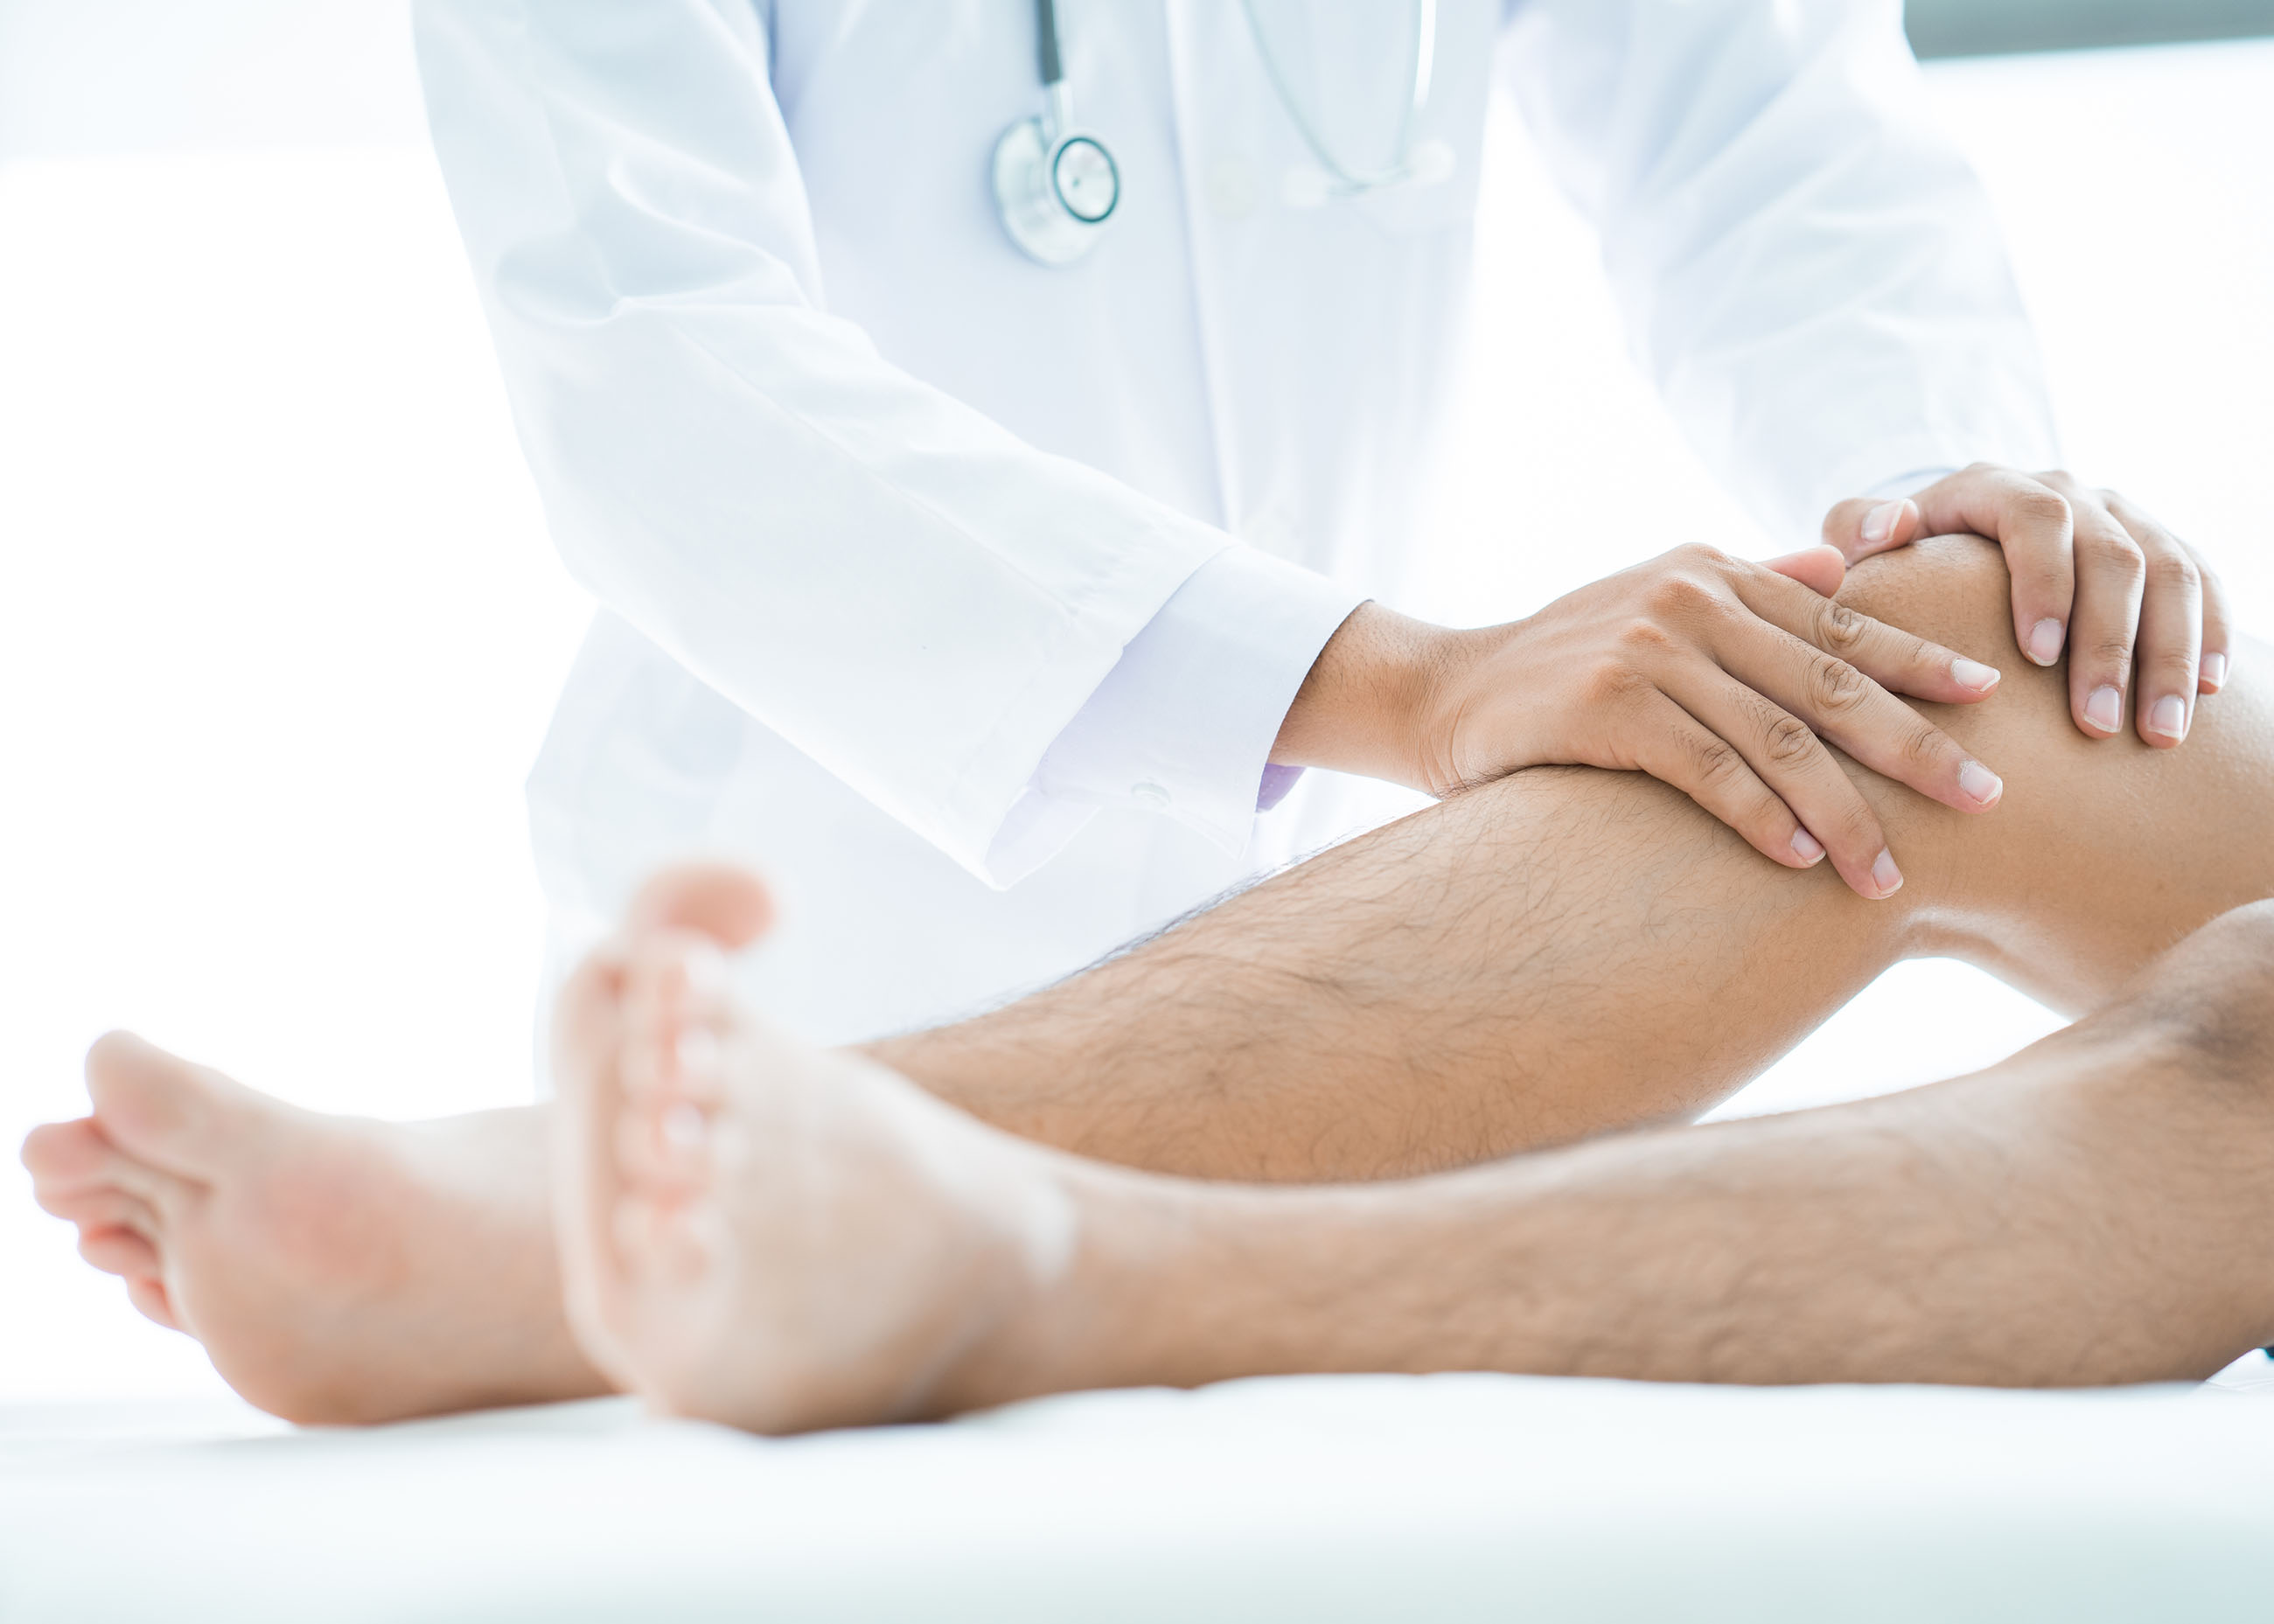 Close-up of male physiotherapist massaging the leg of patient in a physio room.